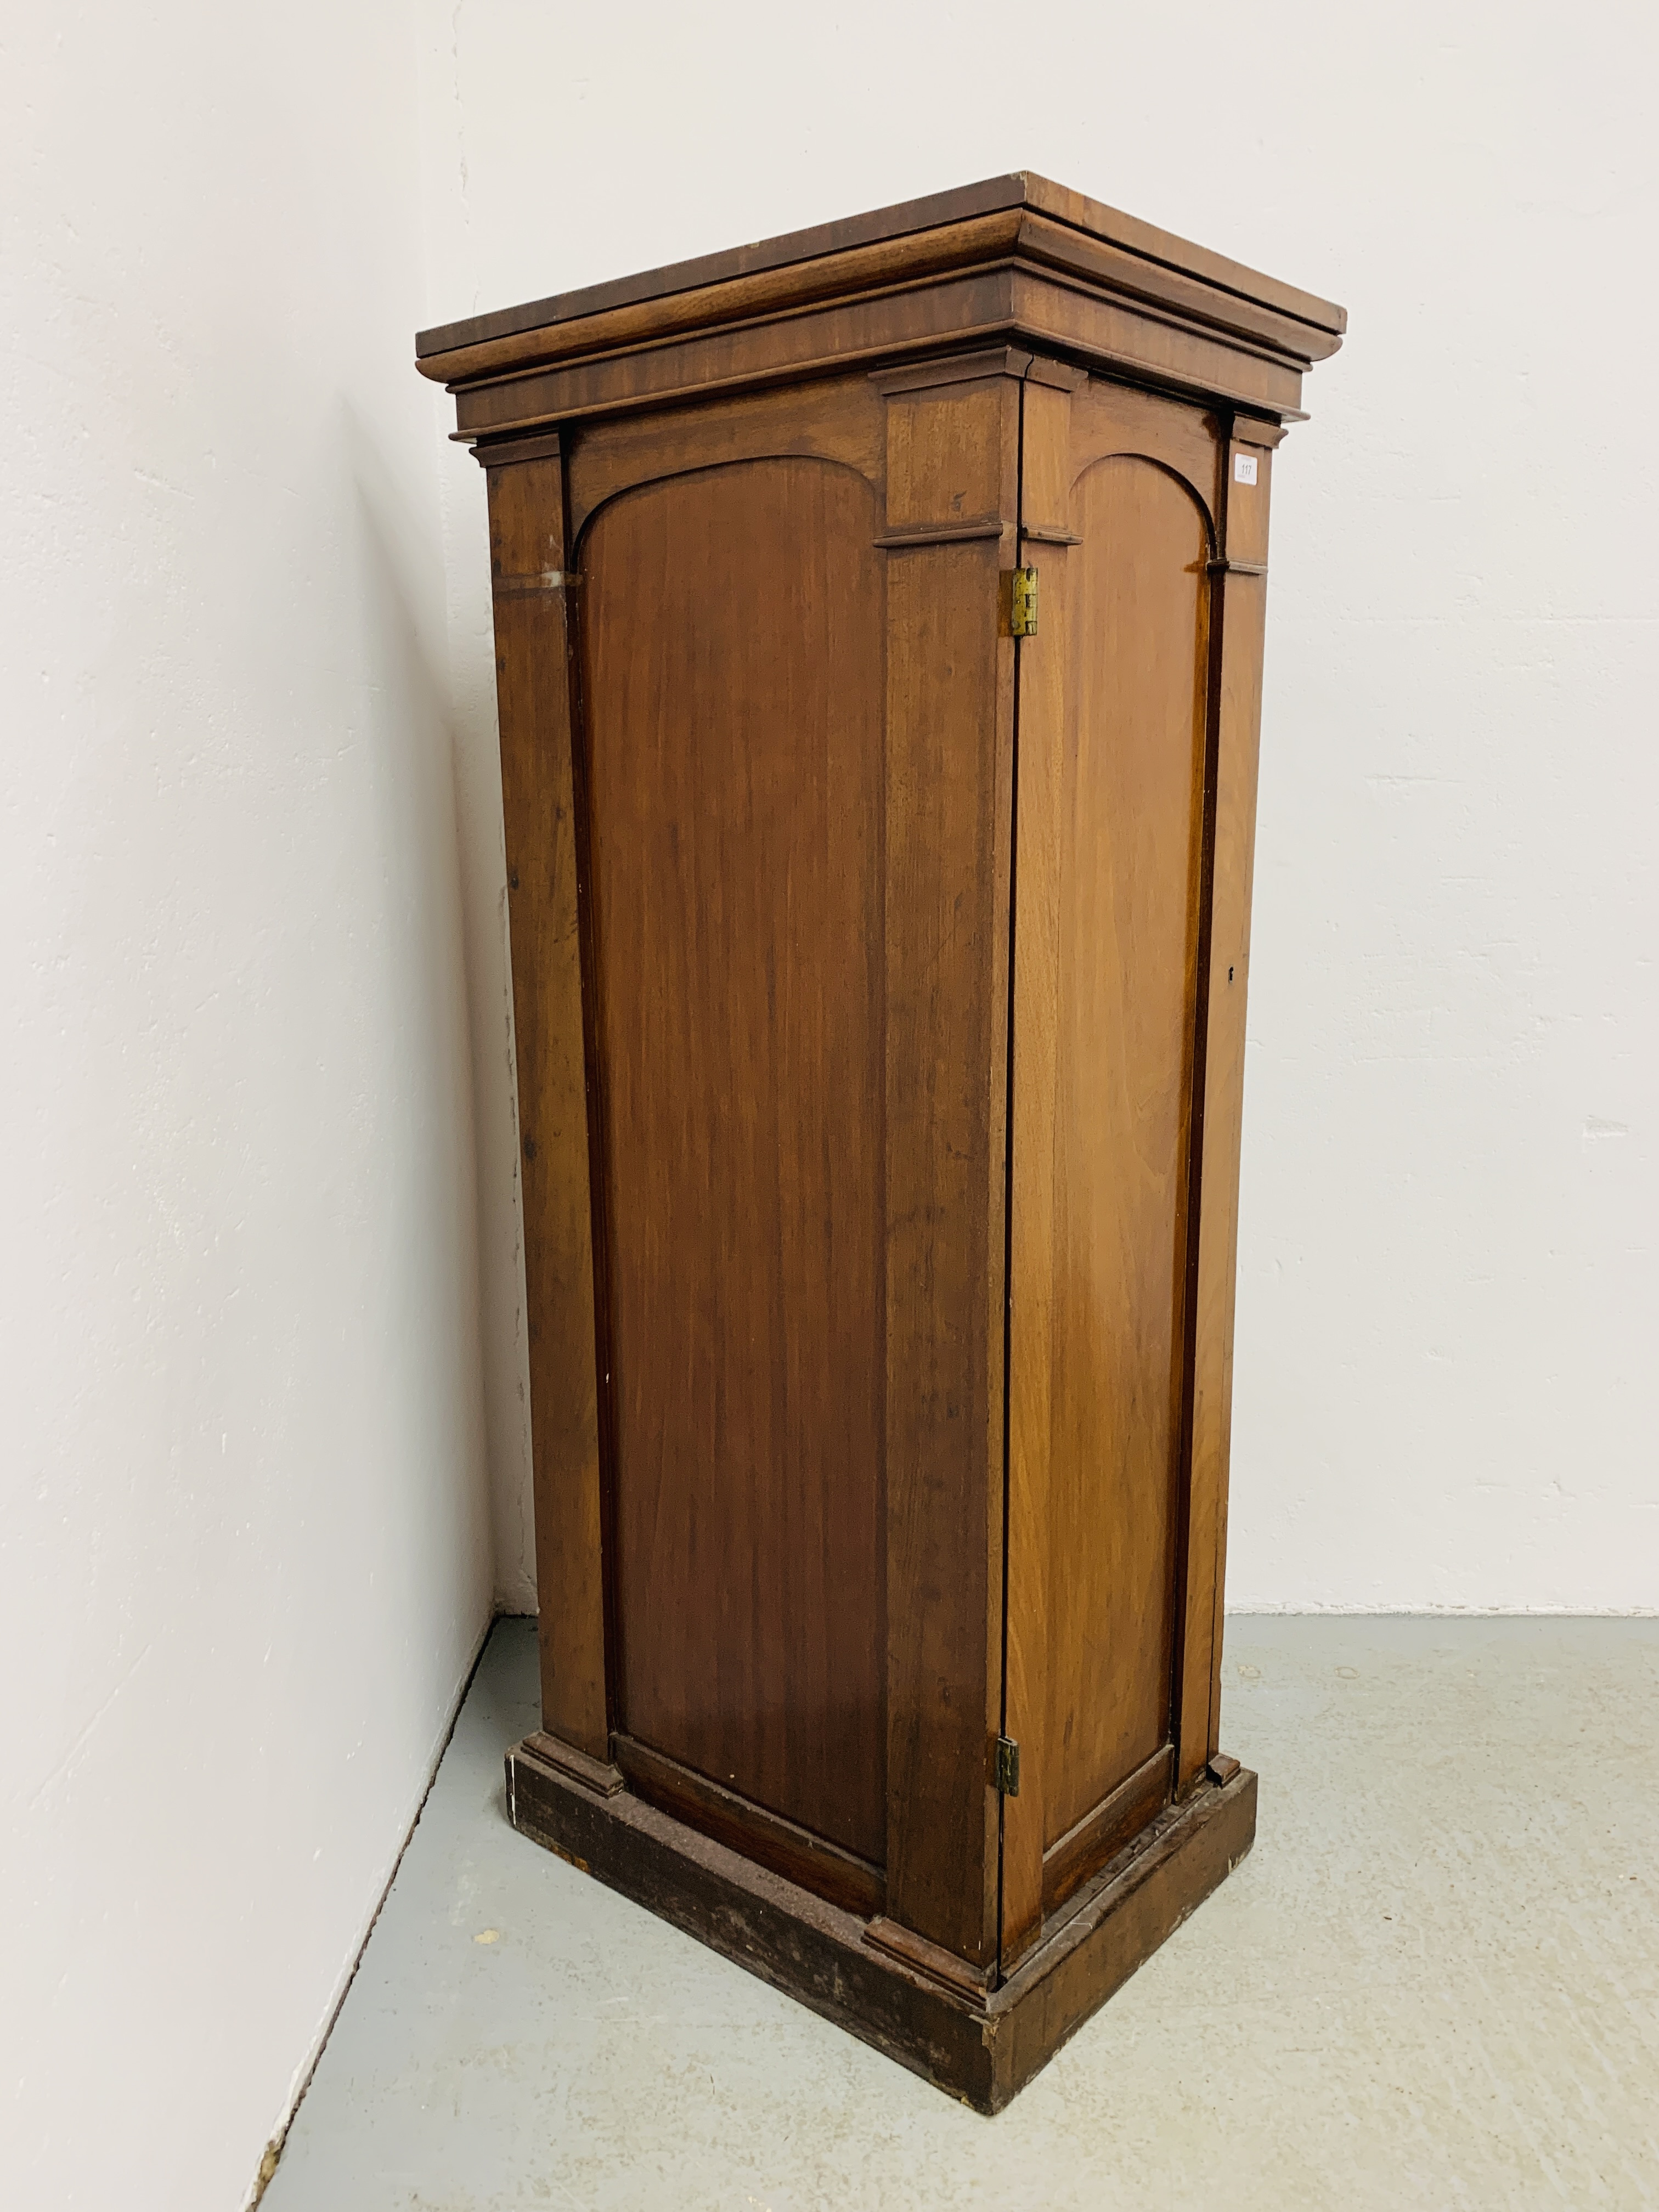 AN EARLY C19TH MAHOGANY SINGLE DOOR PEDESTAL (PART OF A LARGER PIECE) ENCLOSING SEVEN DRAWERS - Image 5 of 17